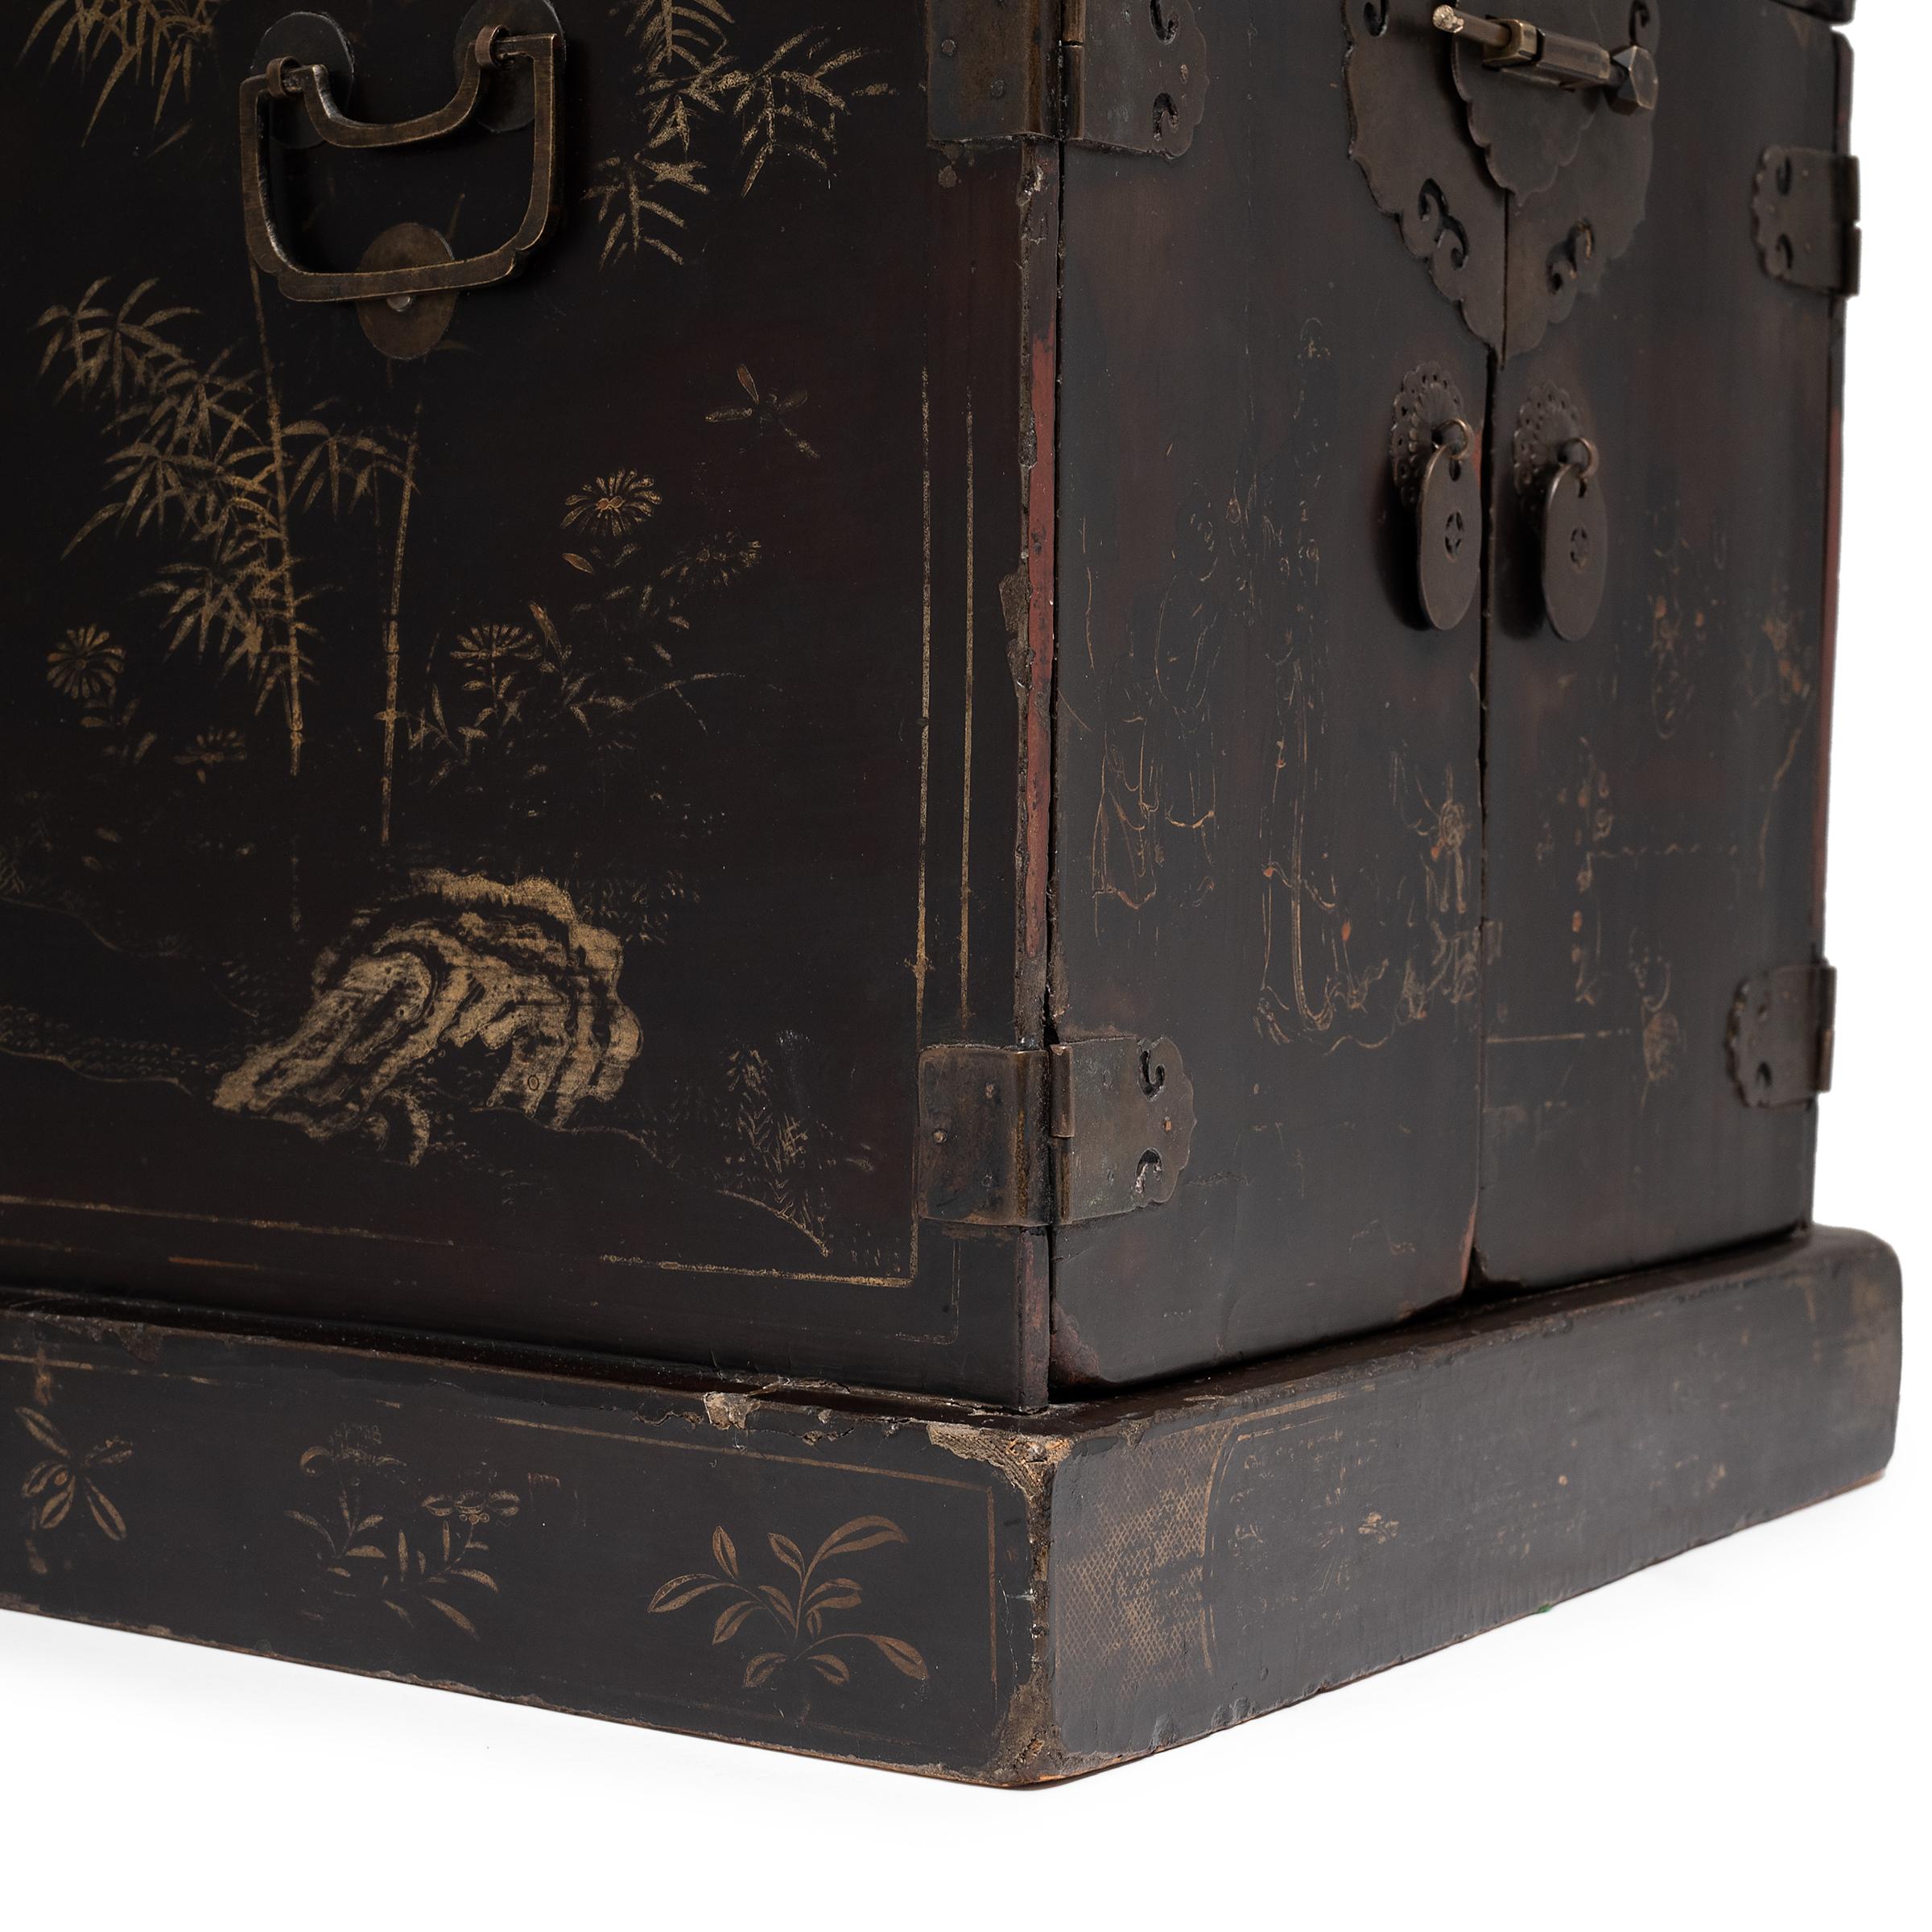 Chinese Black Lacquer Vanity Box, c. 1850 For Sale 2